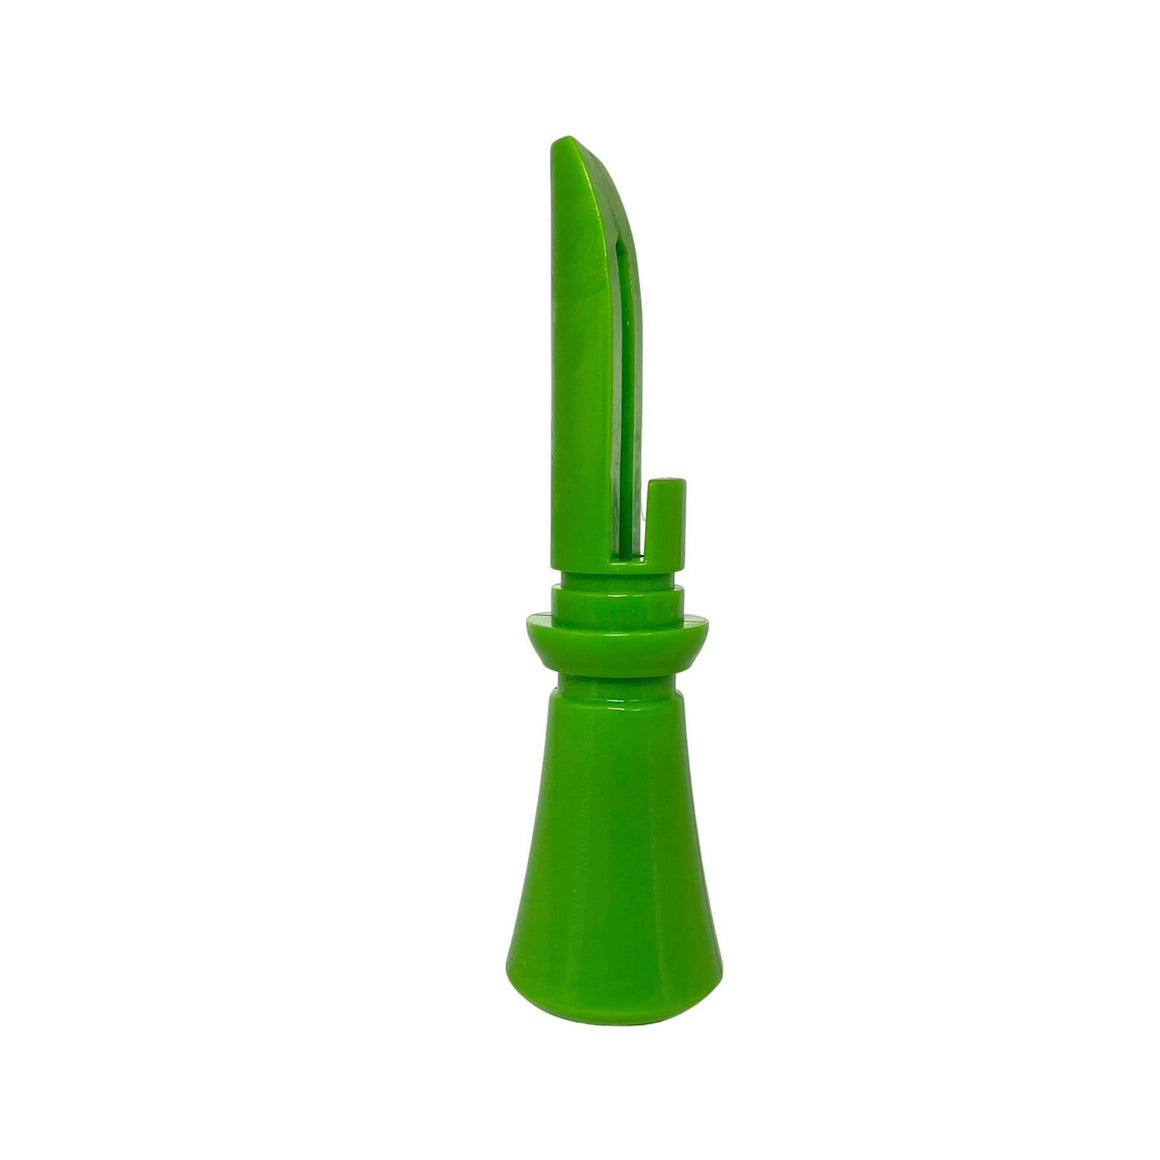 SLIME GREEN POLYCARBONATE DUCK CALL INSERT